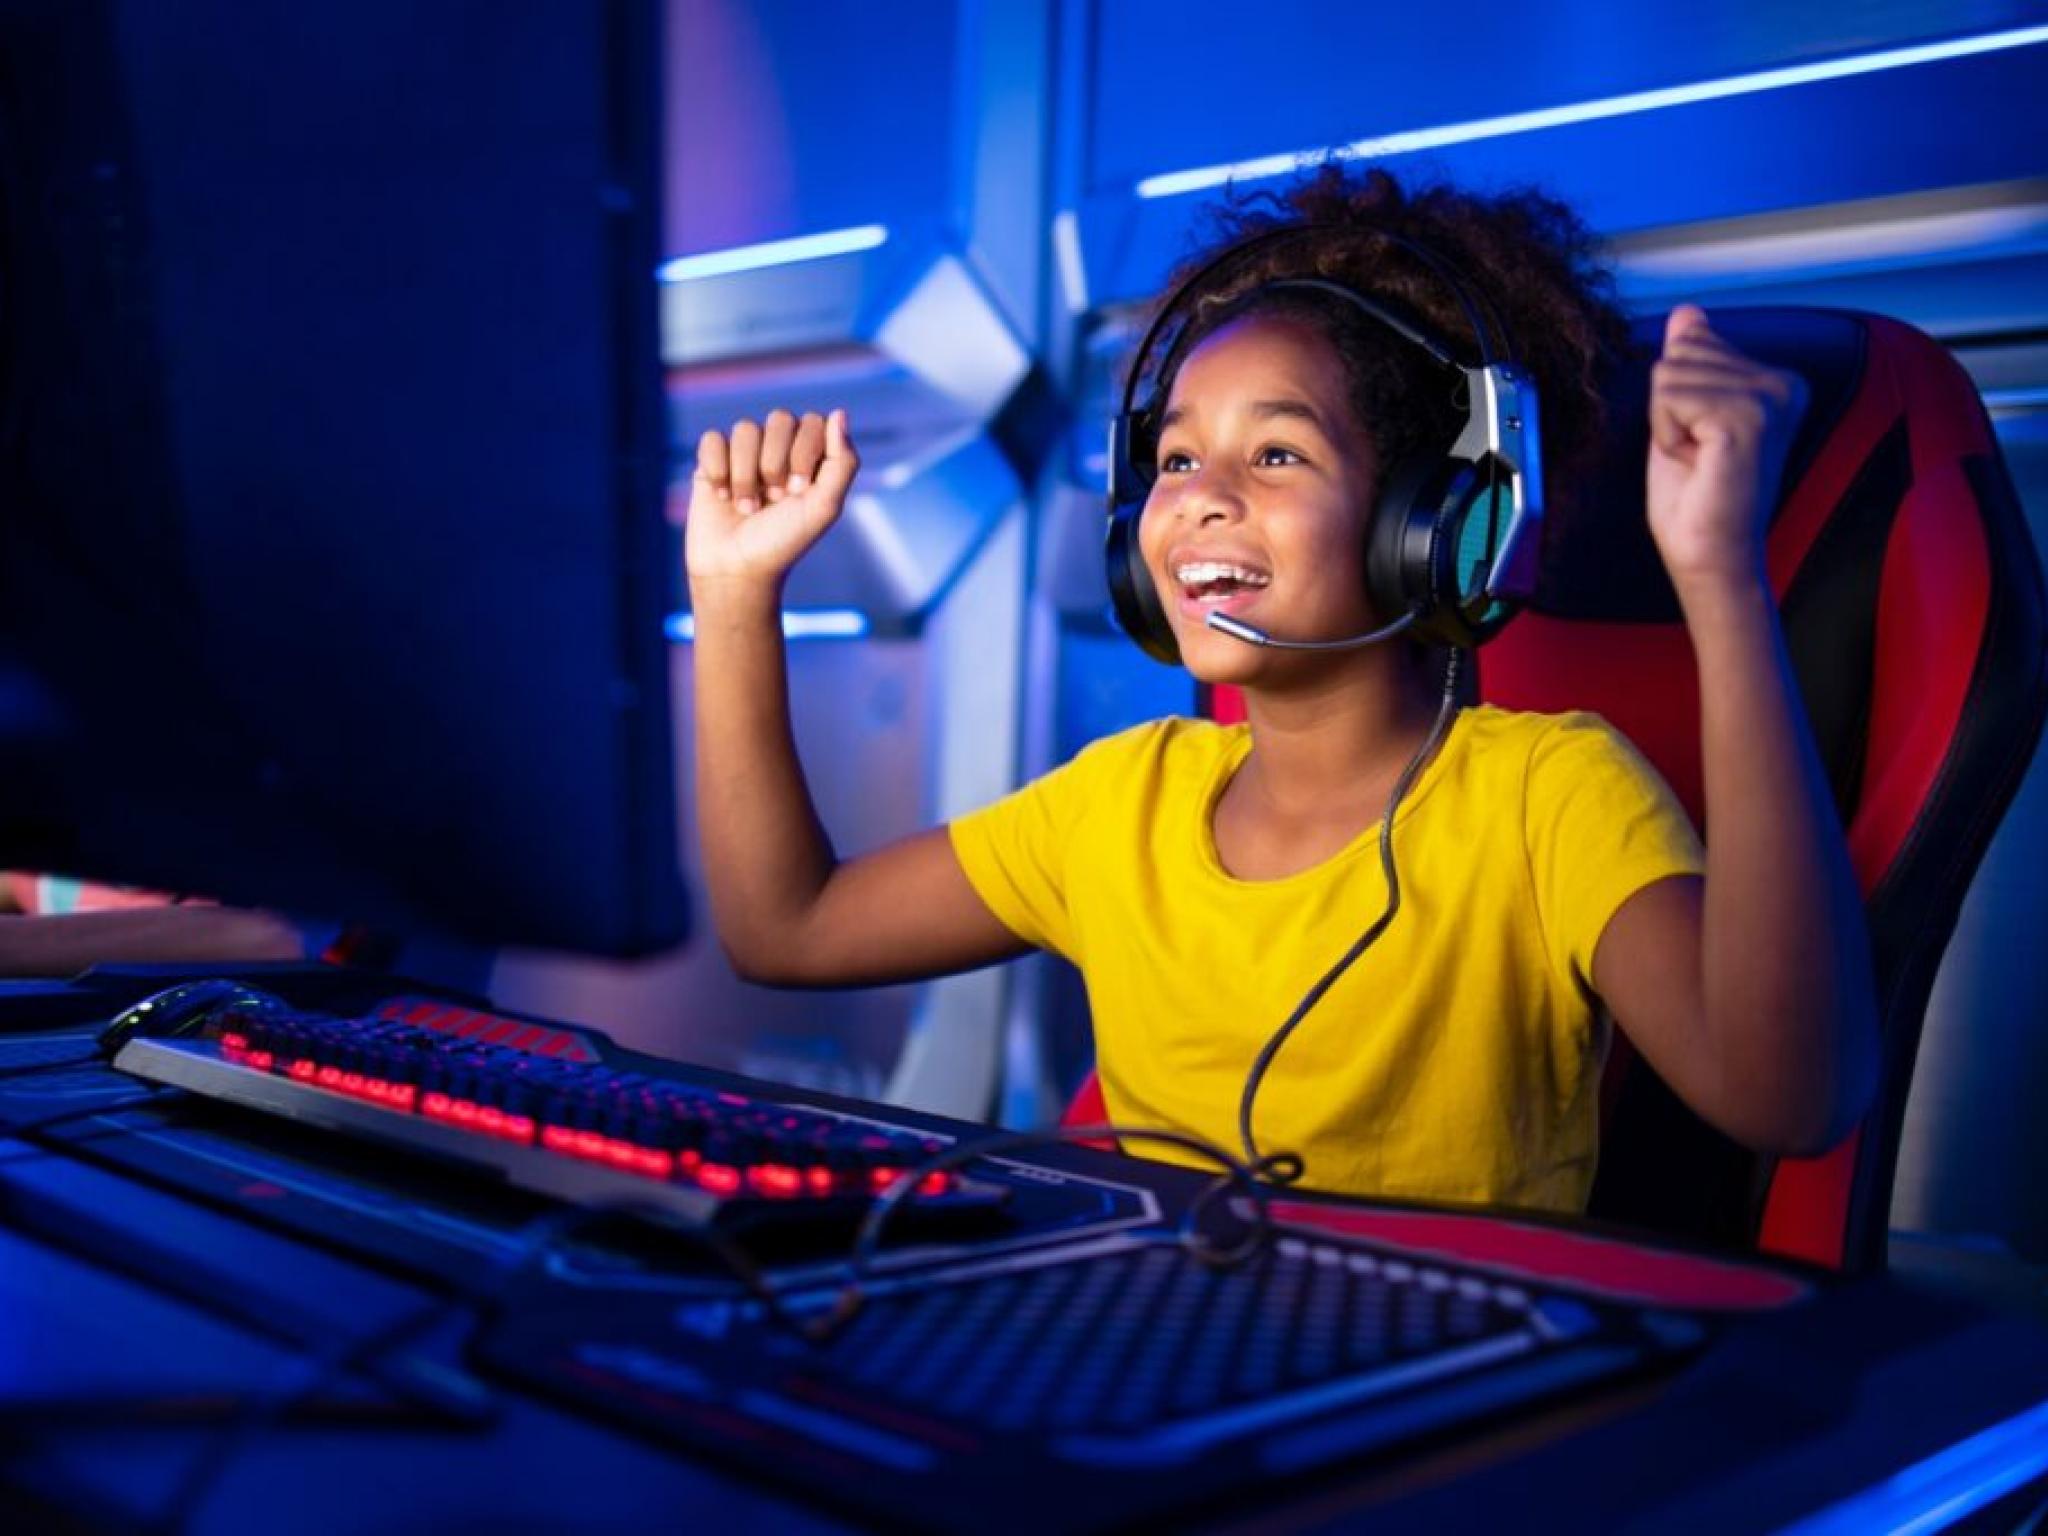  new-child-safety-laws-could-transform-gaming-industry-regulations 